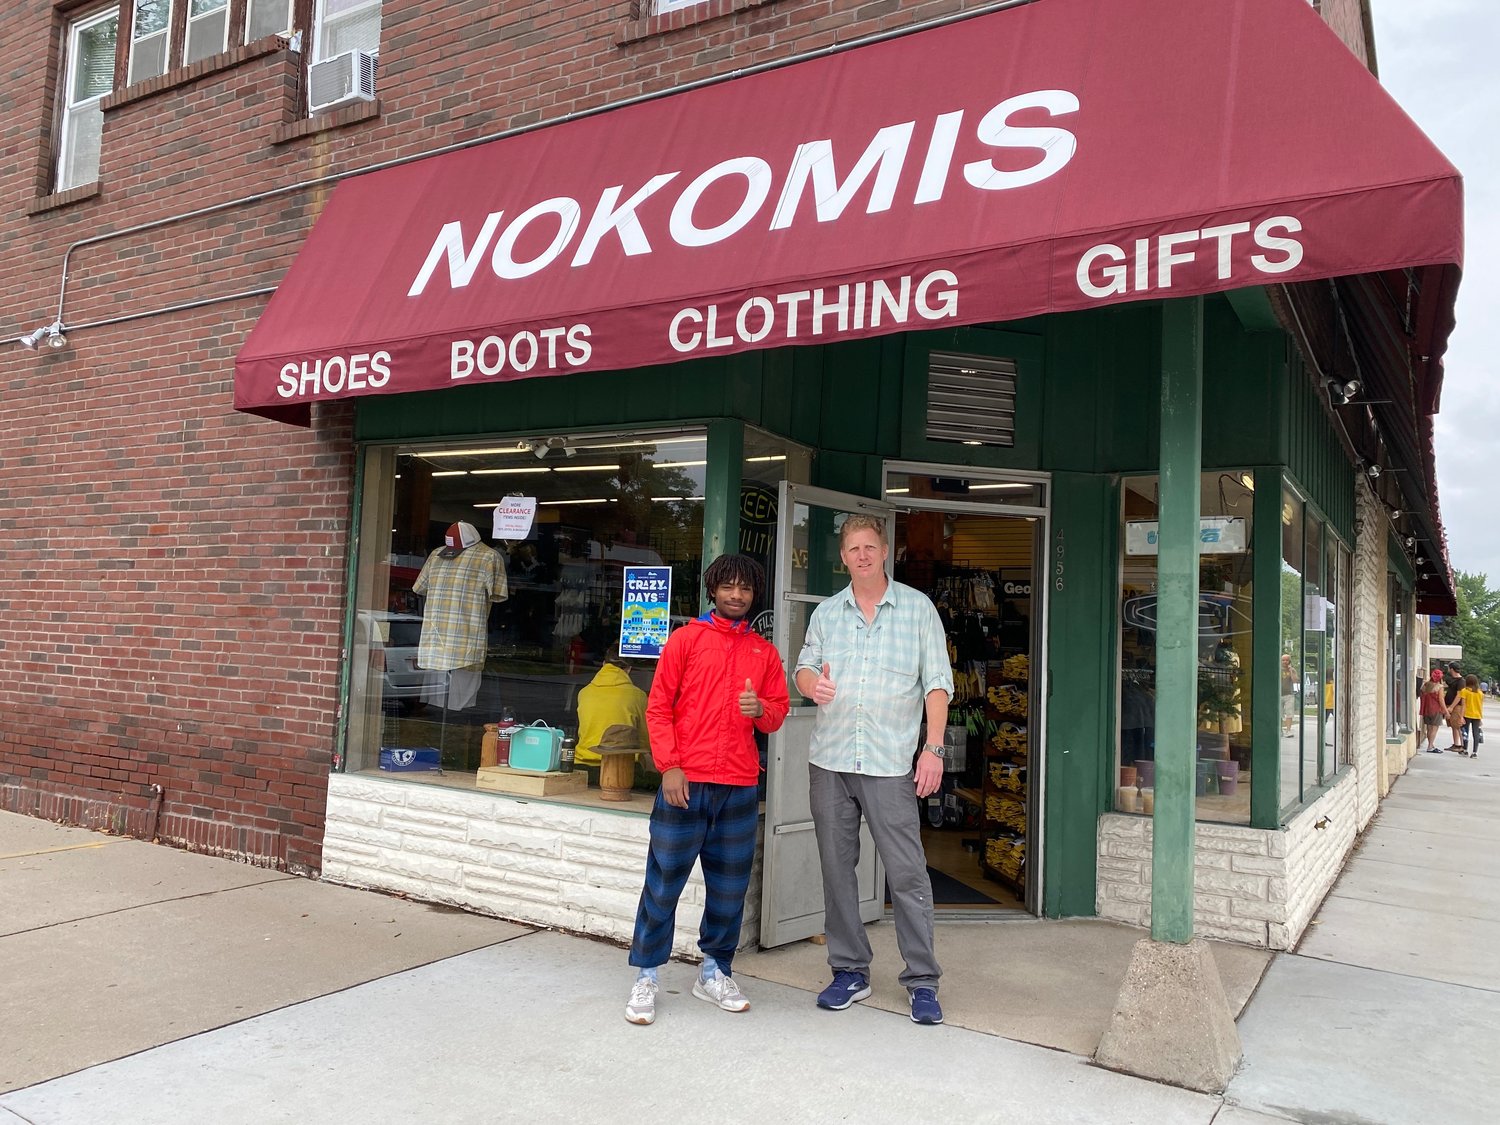 Nokomis Shoe Shop owner Steve Negaard (right) with Tre McClellan welcome folks into the store for the sidewalk sale, which moved instead after it rained on Saturday, Aug. 7. Negaard was delighted to see other business engaging in Crazy Days again. "As a guy who has been doing it for 45 years, it's so fun to see the neighborhood coming back alive," he said. Nokomis Shoes used to be located next to the bowling alley (formerly Skylanes, now Town Hall) and items filled the sidewalk in front of the bowling alley. "I remember being a kid in high school and dreading working the long days in the heat," said Negaard.